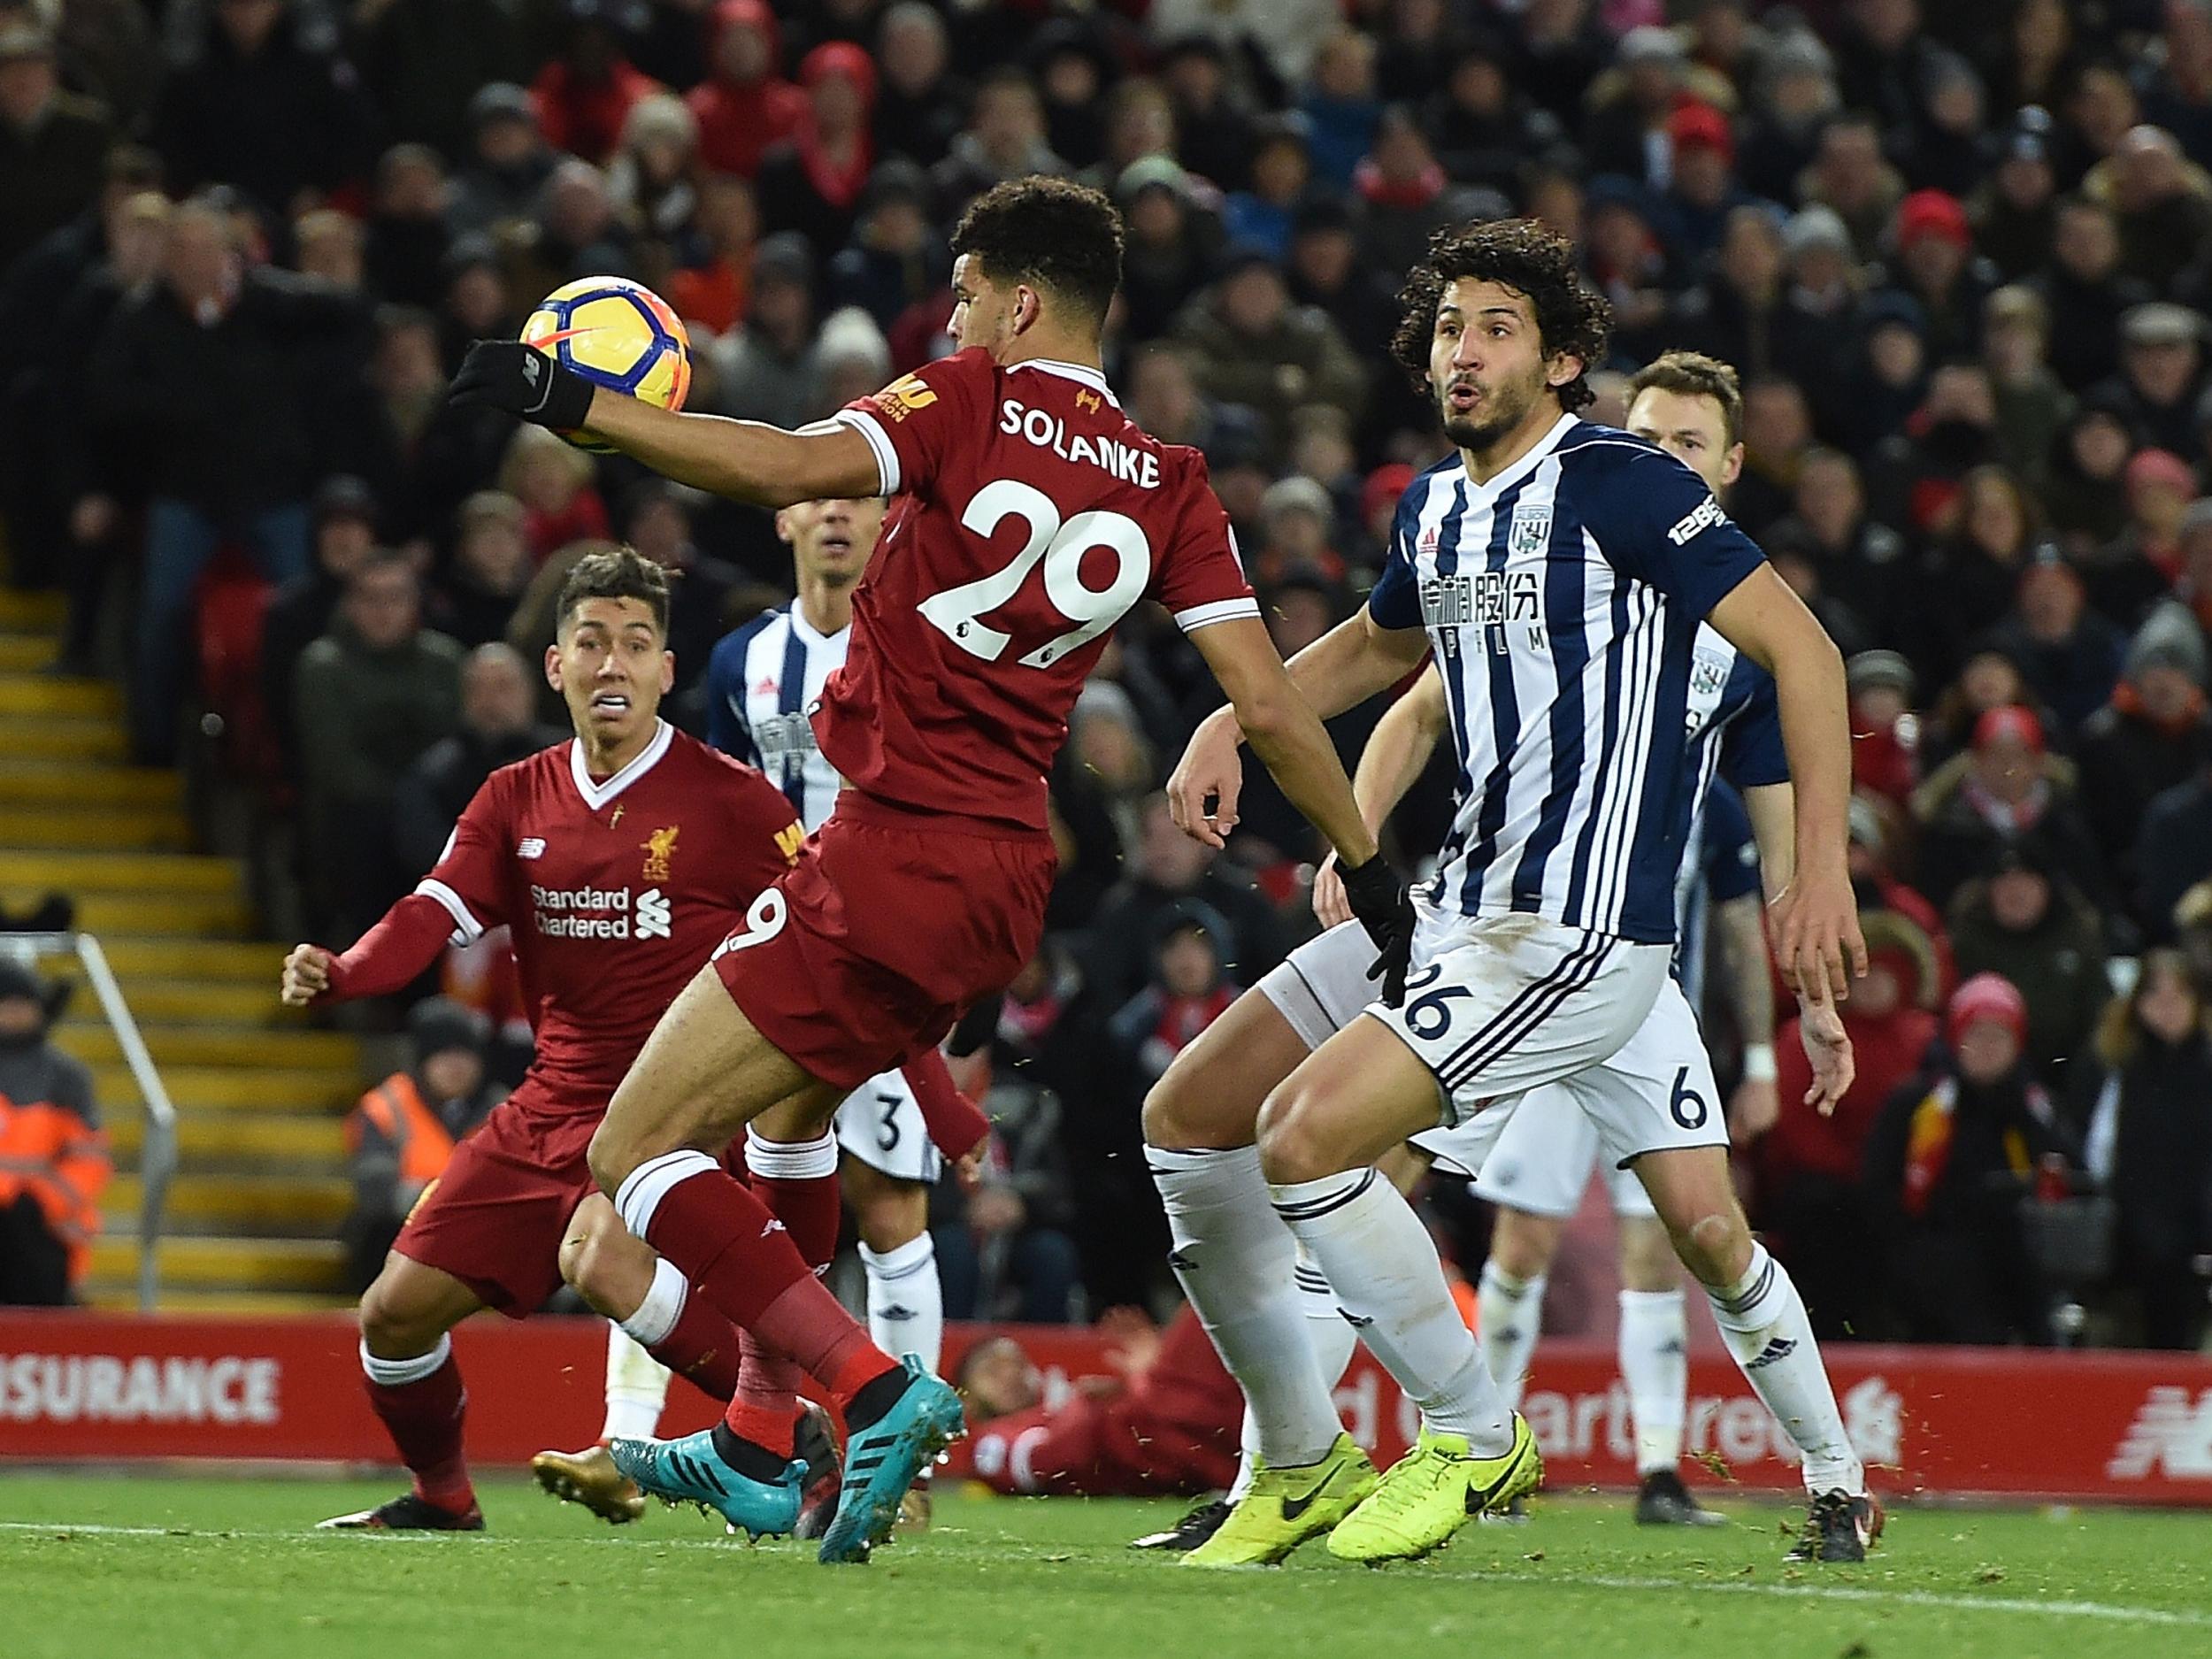 Dominic Solanke's late goal was ruled out after the ball struck his left hand